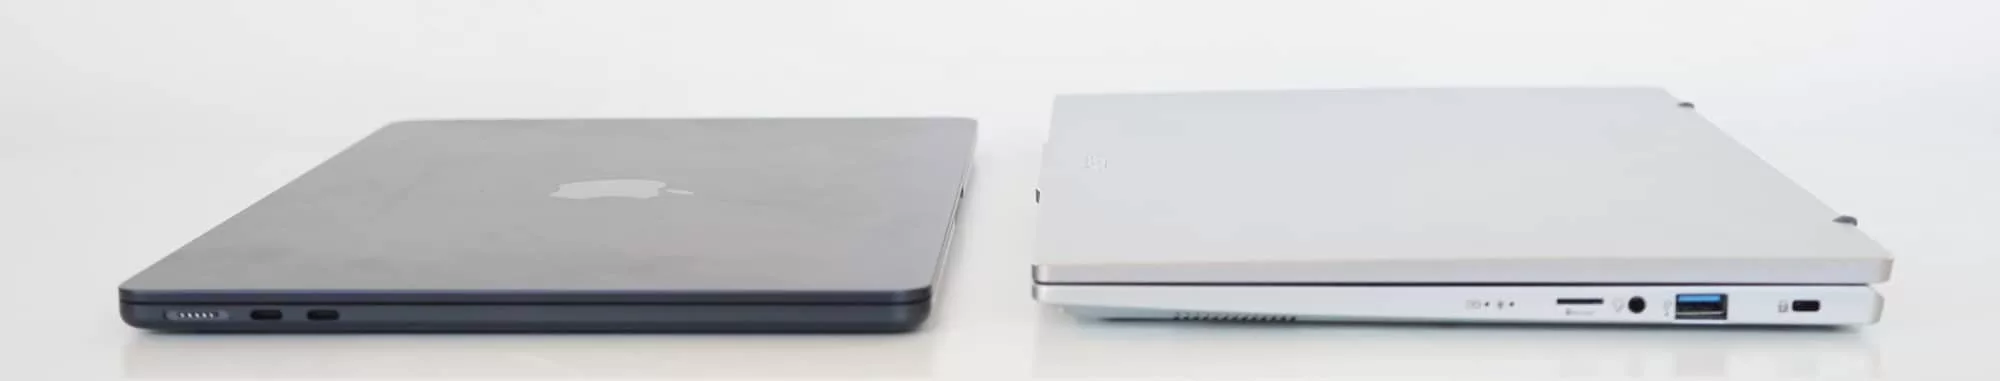 There's a clear difference in thickness between the M3 MacBook Air (left) and the Swift Go 14 (right). 